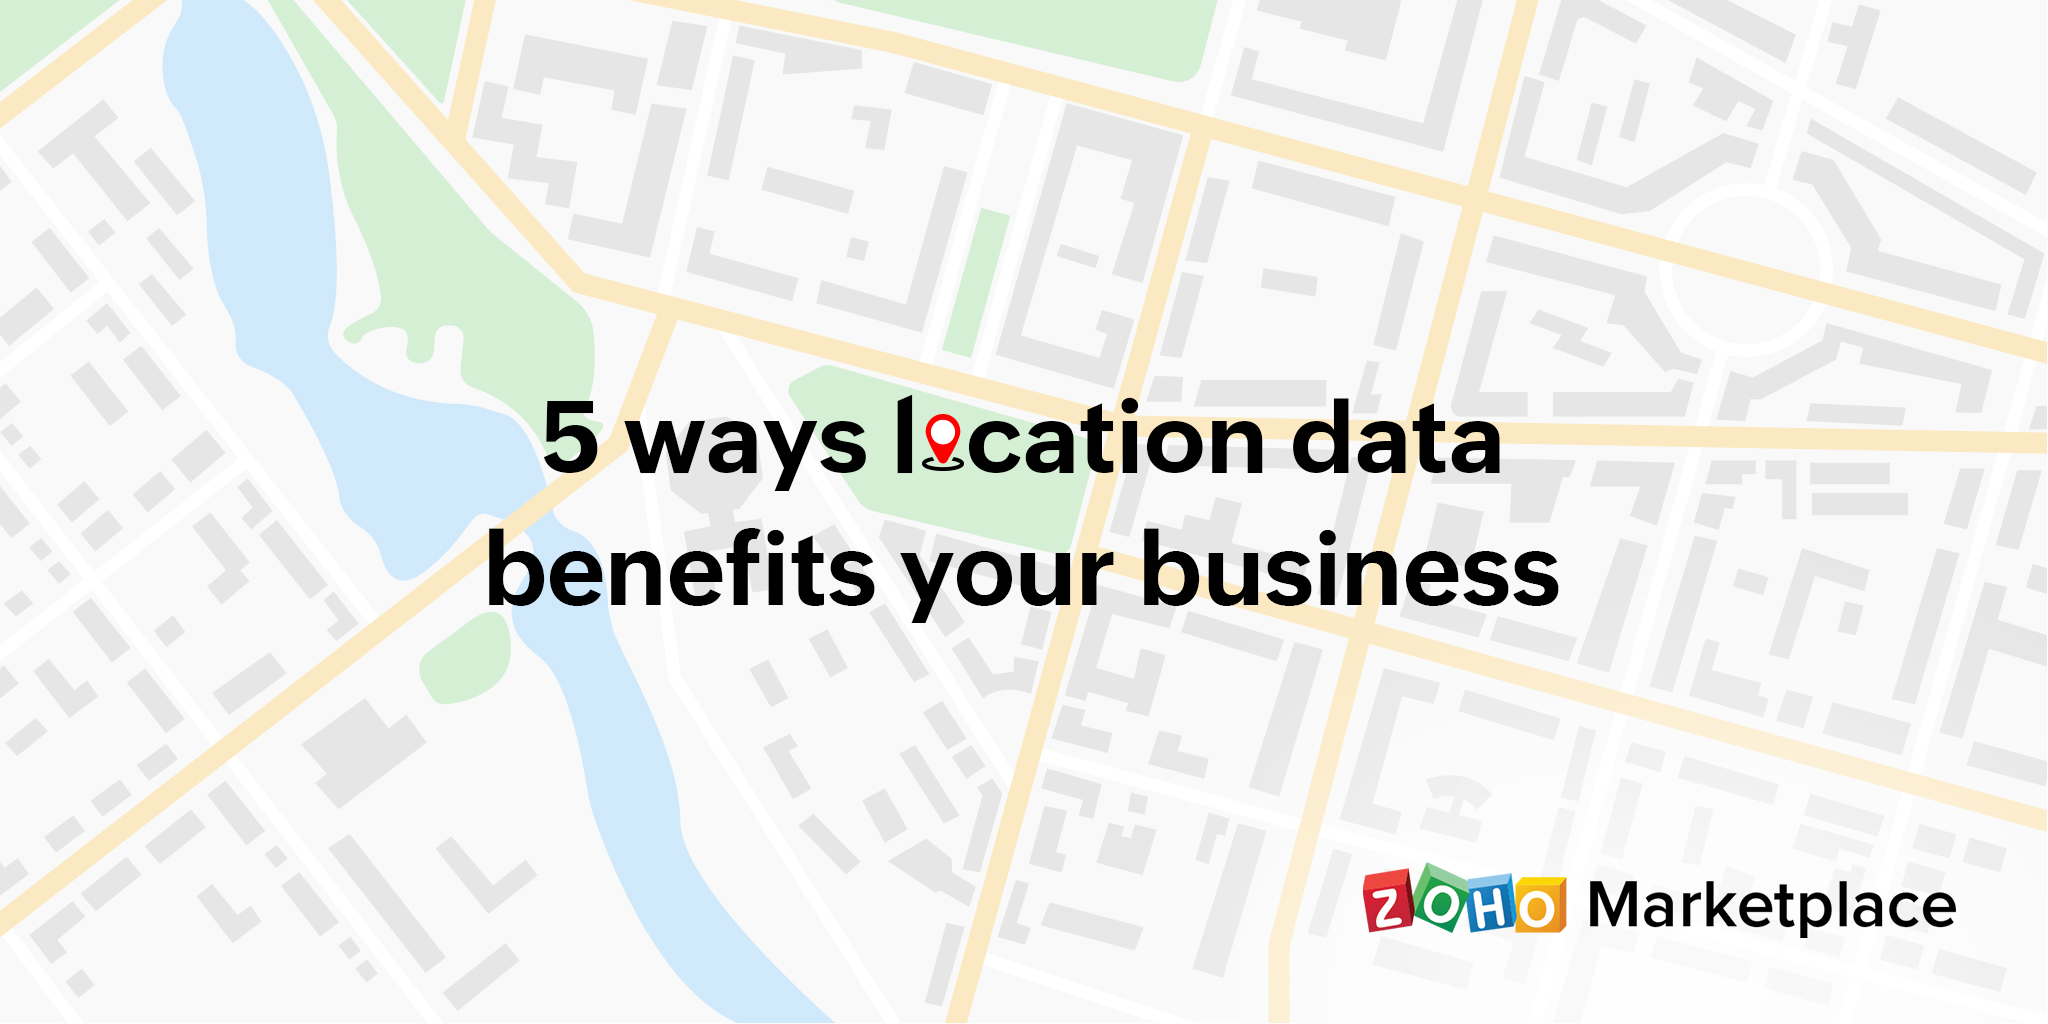 5 ways location data benefits your business